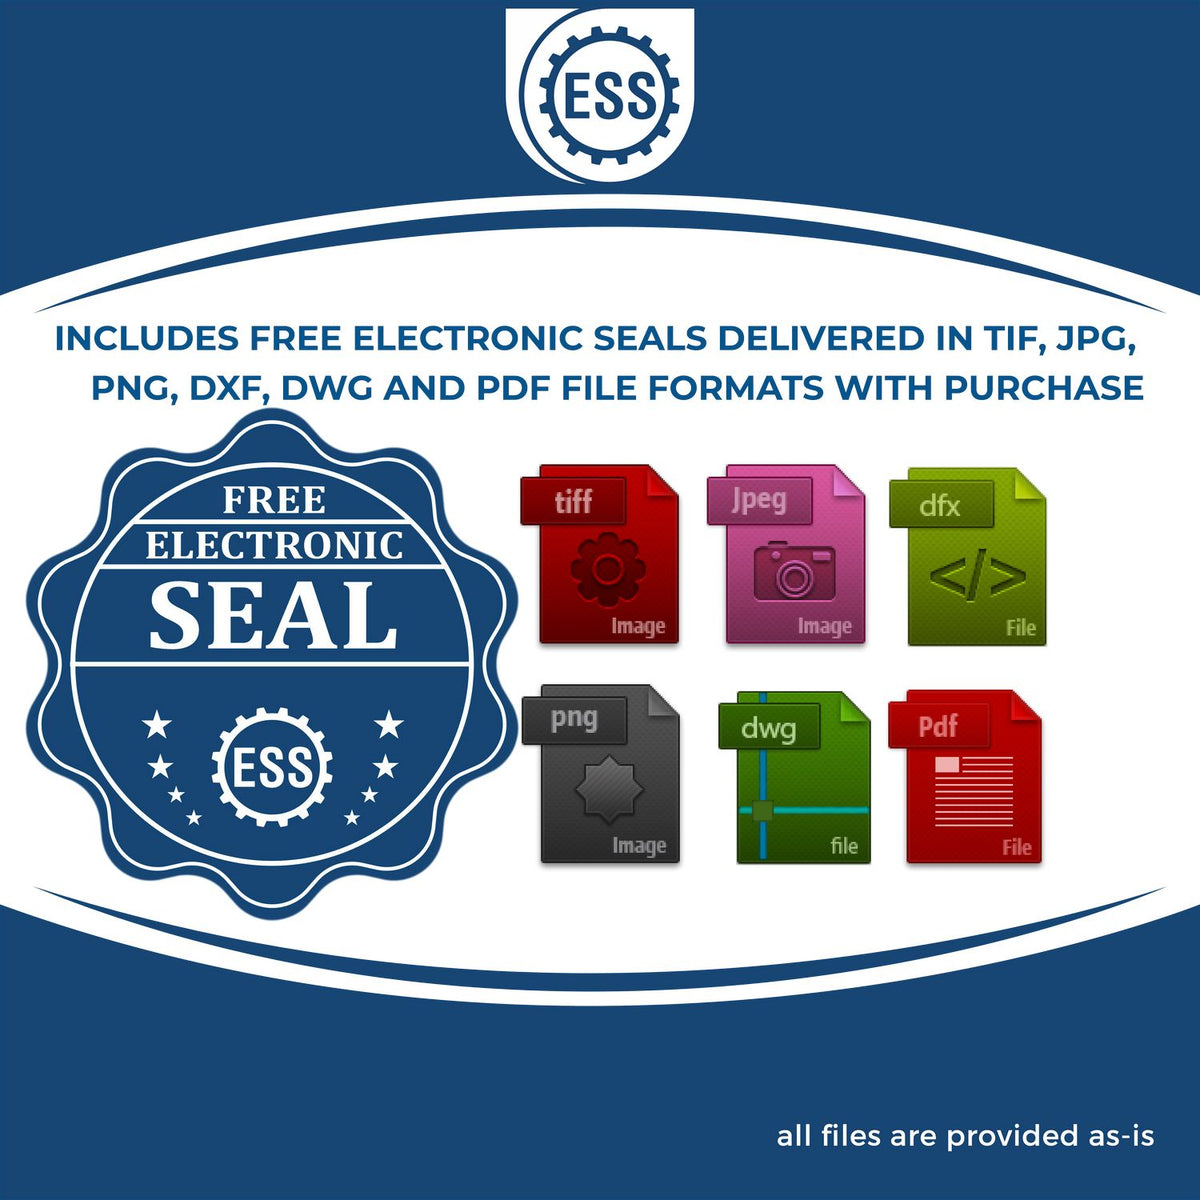 An infographic for the free electronic seal for the New Hampshire Desk Architect Embossing Seal illustrating the different file type icons such as DXF, DWG, TIF, JPG and PNG.